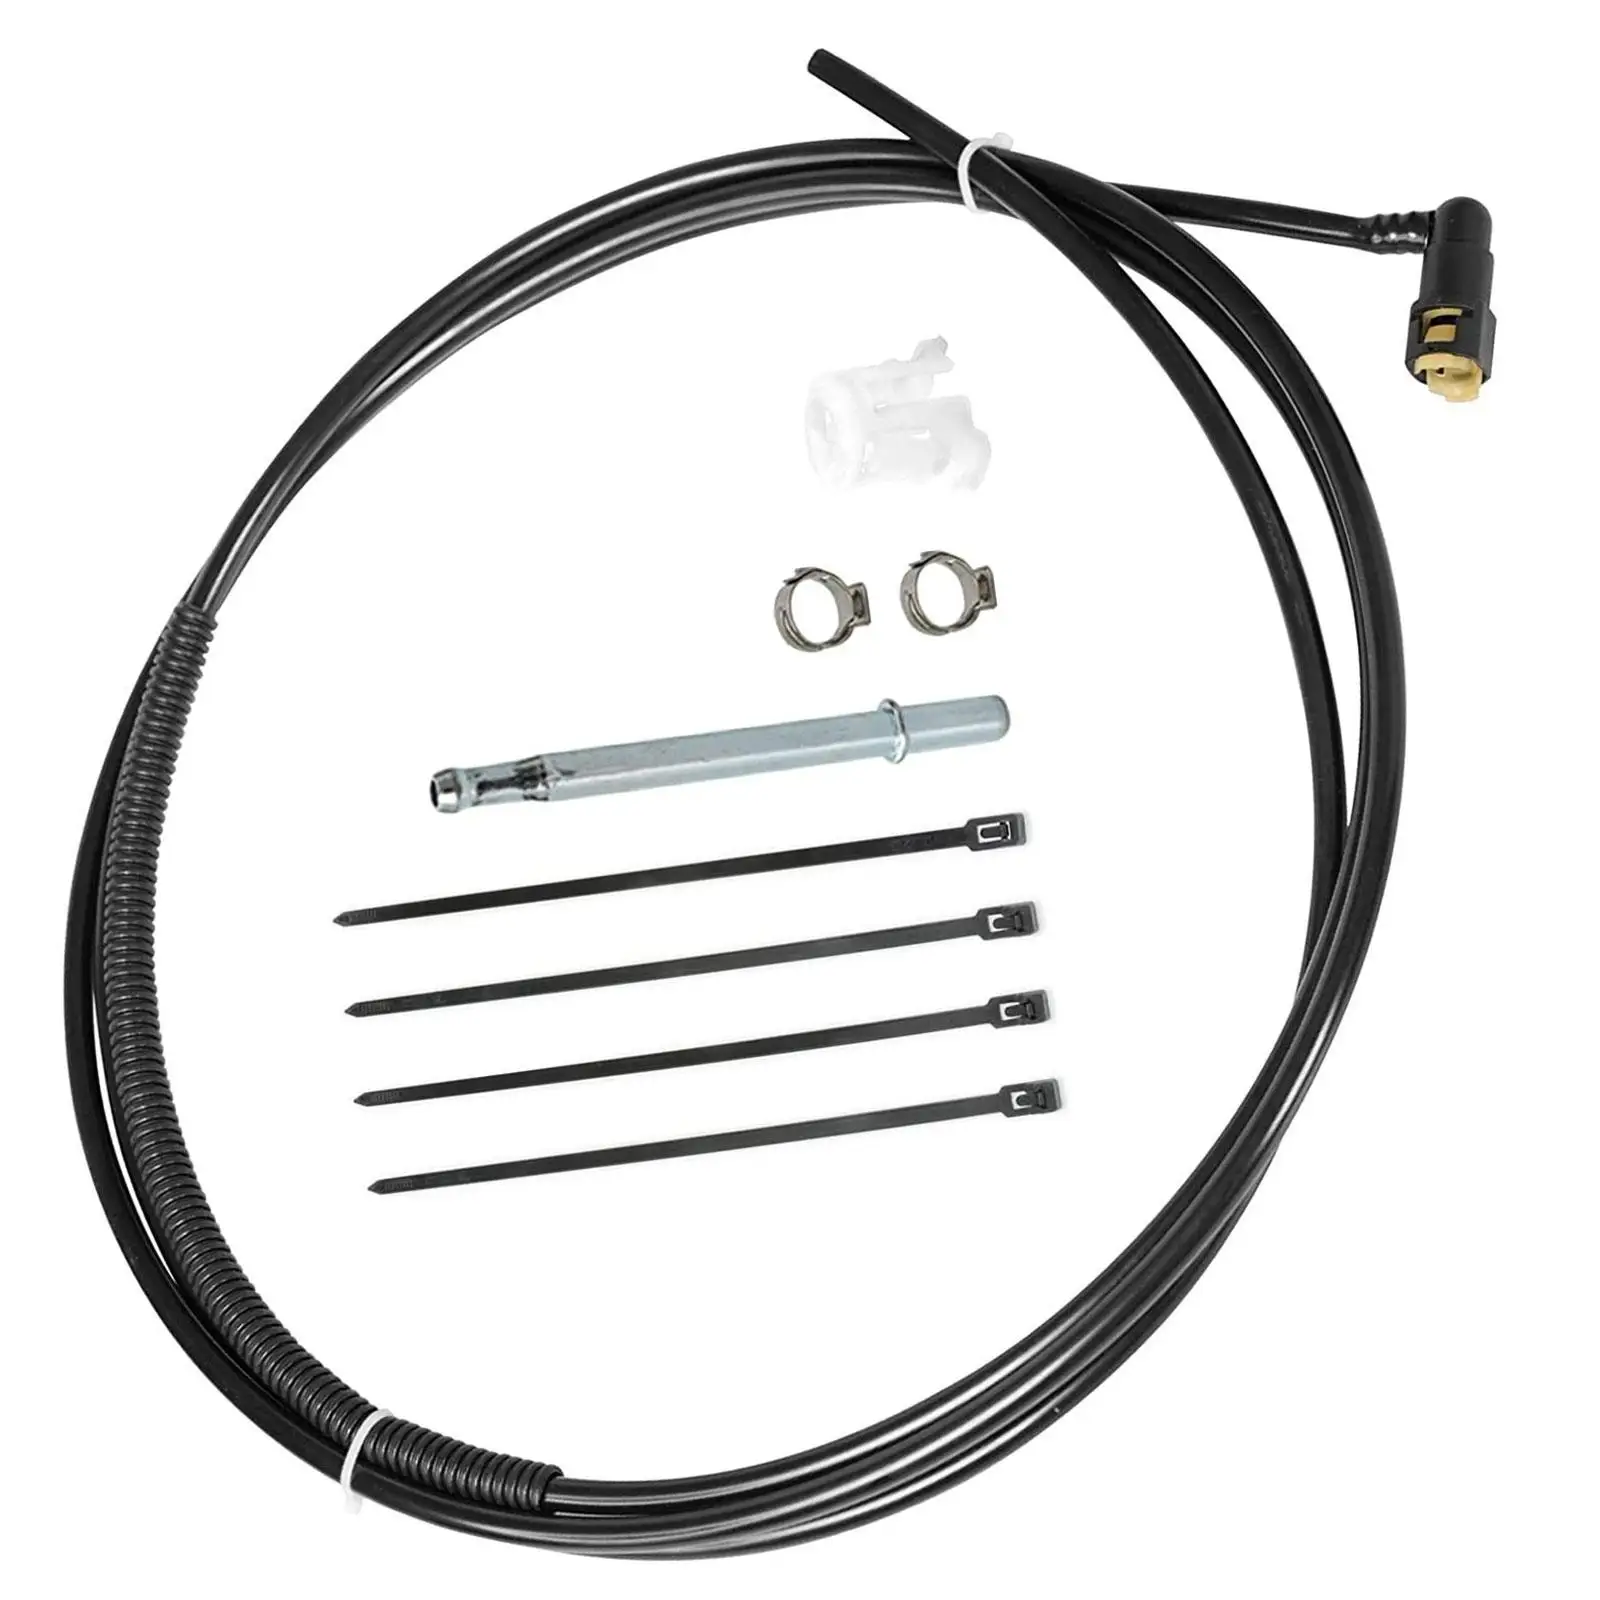 Pick up Gas Fuel Line Fl-Fg0212 Durable Car Accessories Spare Parts for Pick up